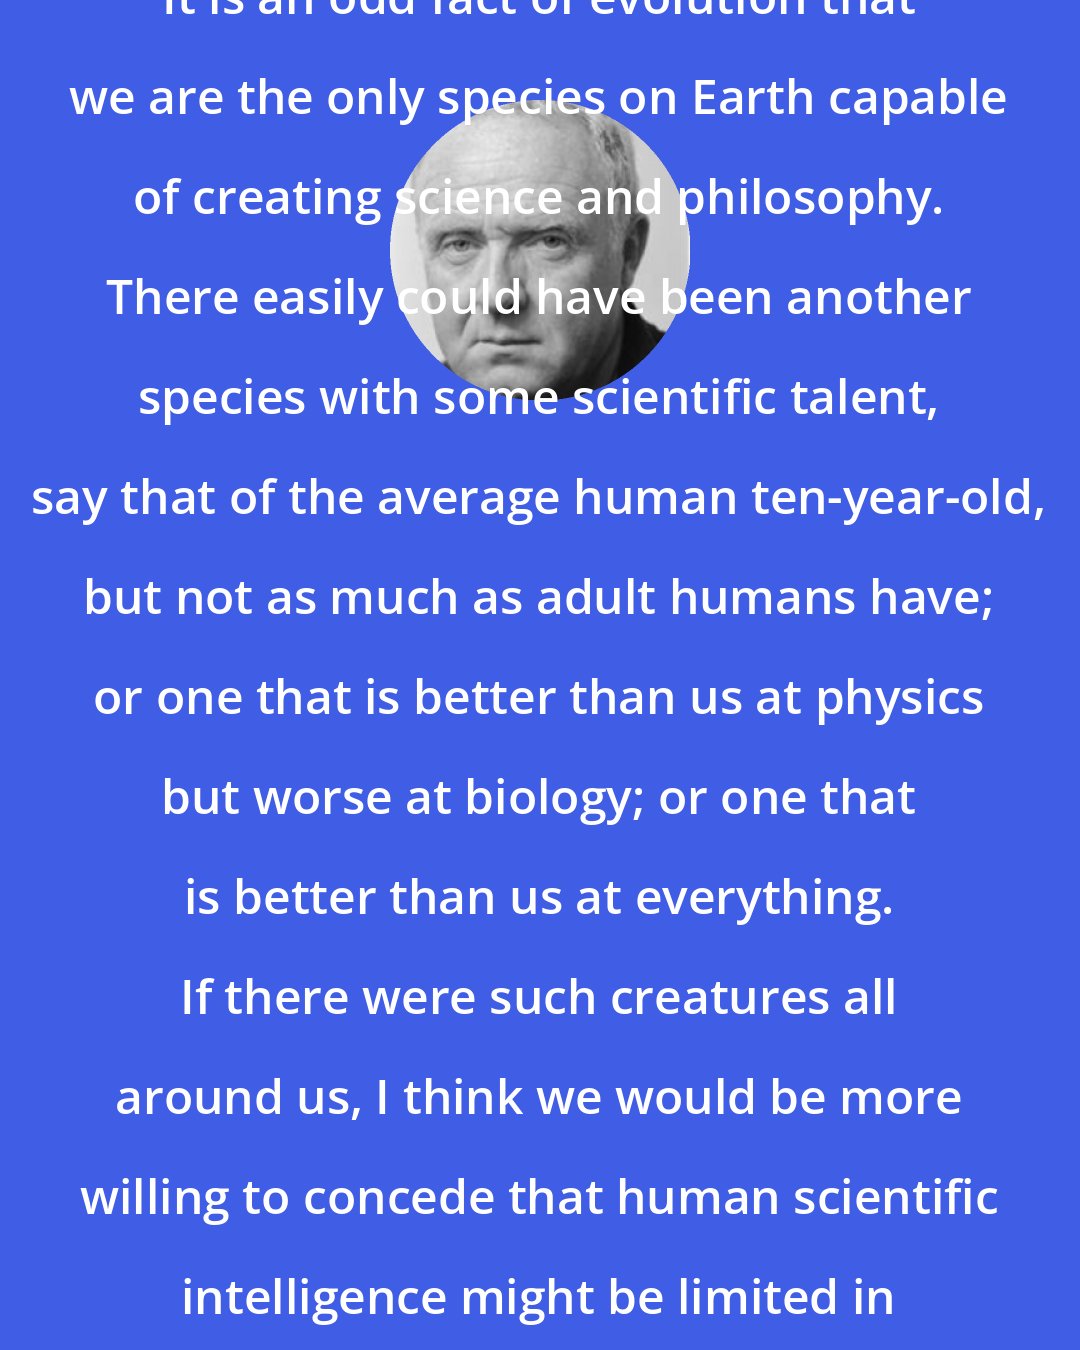 Colin McGinn: It is an odd fact of evolution that we are the only species on Earth capable of creating science and philosophy. There easily could have been another species with some scientific talent, say that of the average human ten-year-old, but not as much as adult humans have; or one that is better than us at physics but worse at biology; or one that is better than us at everything. If there were such creatures all around us, I think we would be more willing to concede that human scientific intelligence might be limited in certain respects.